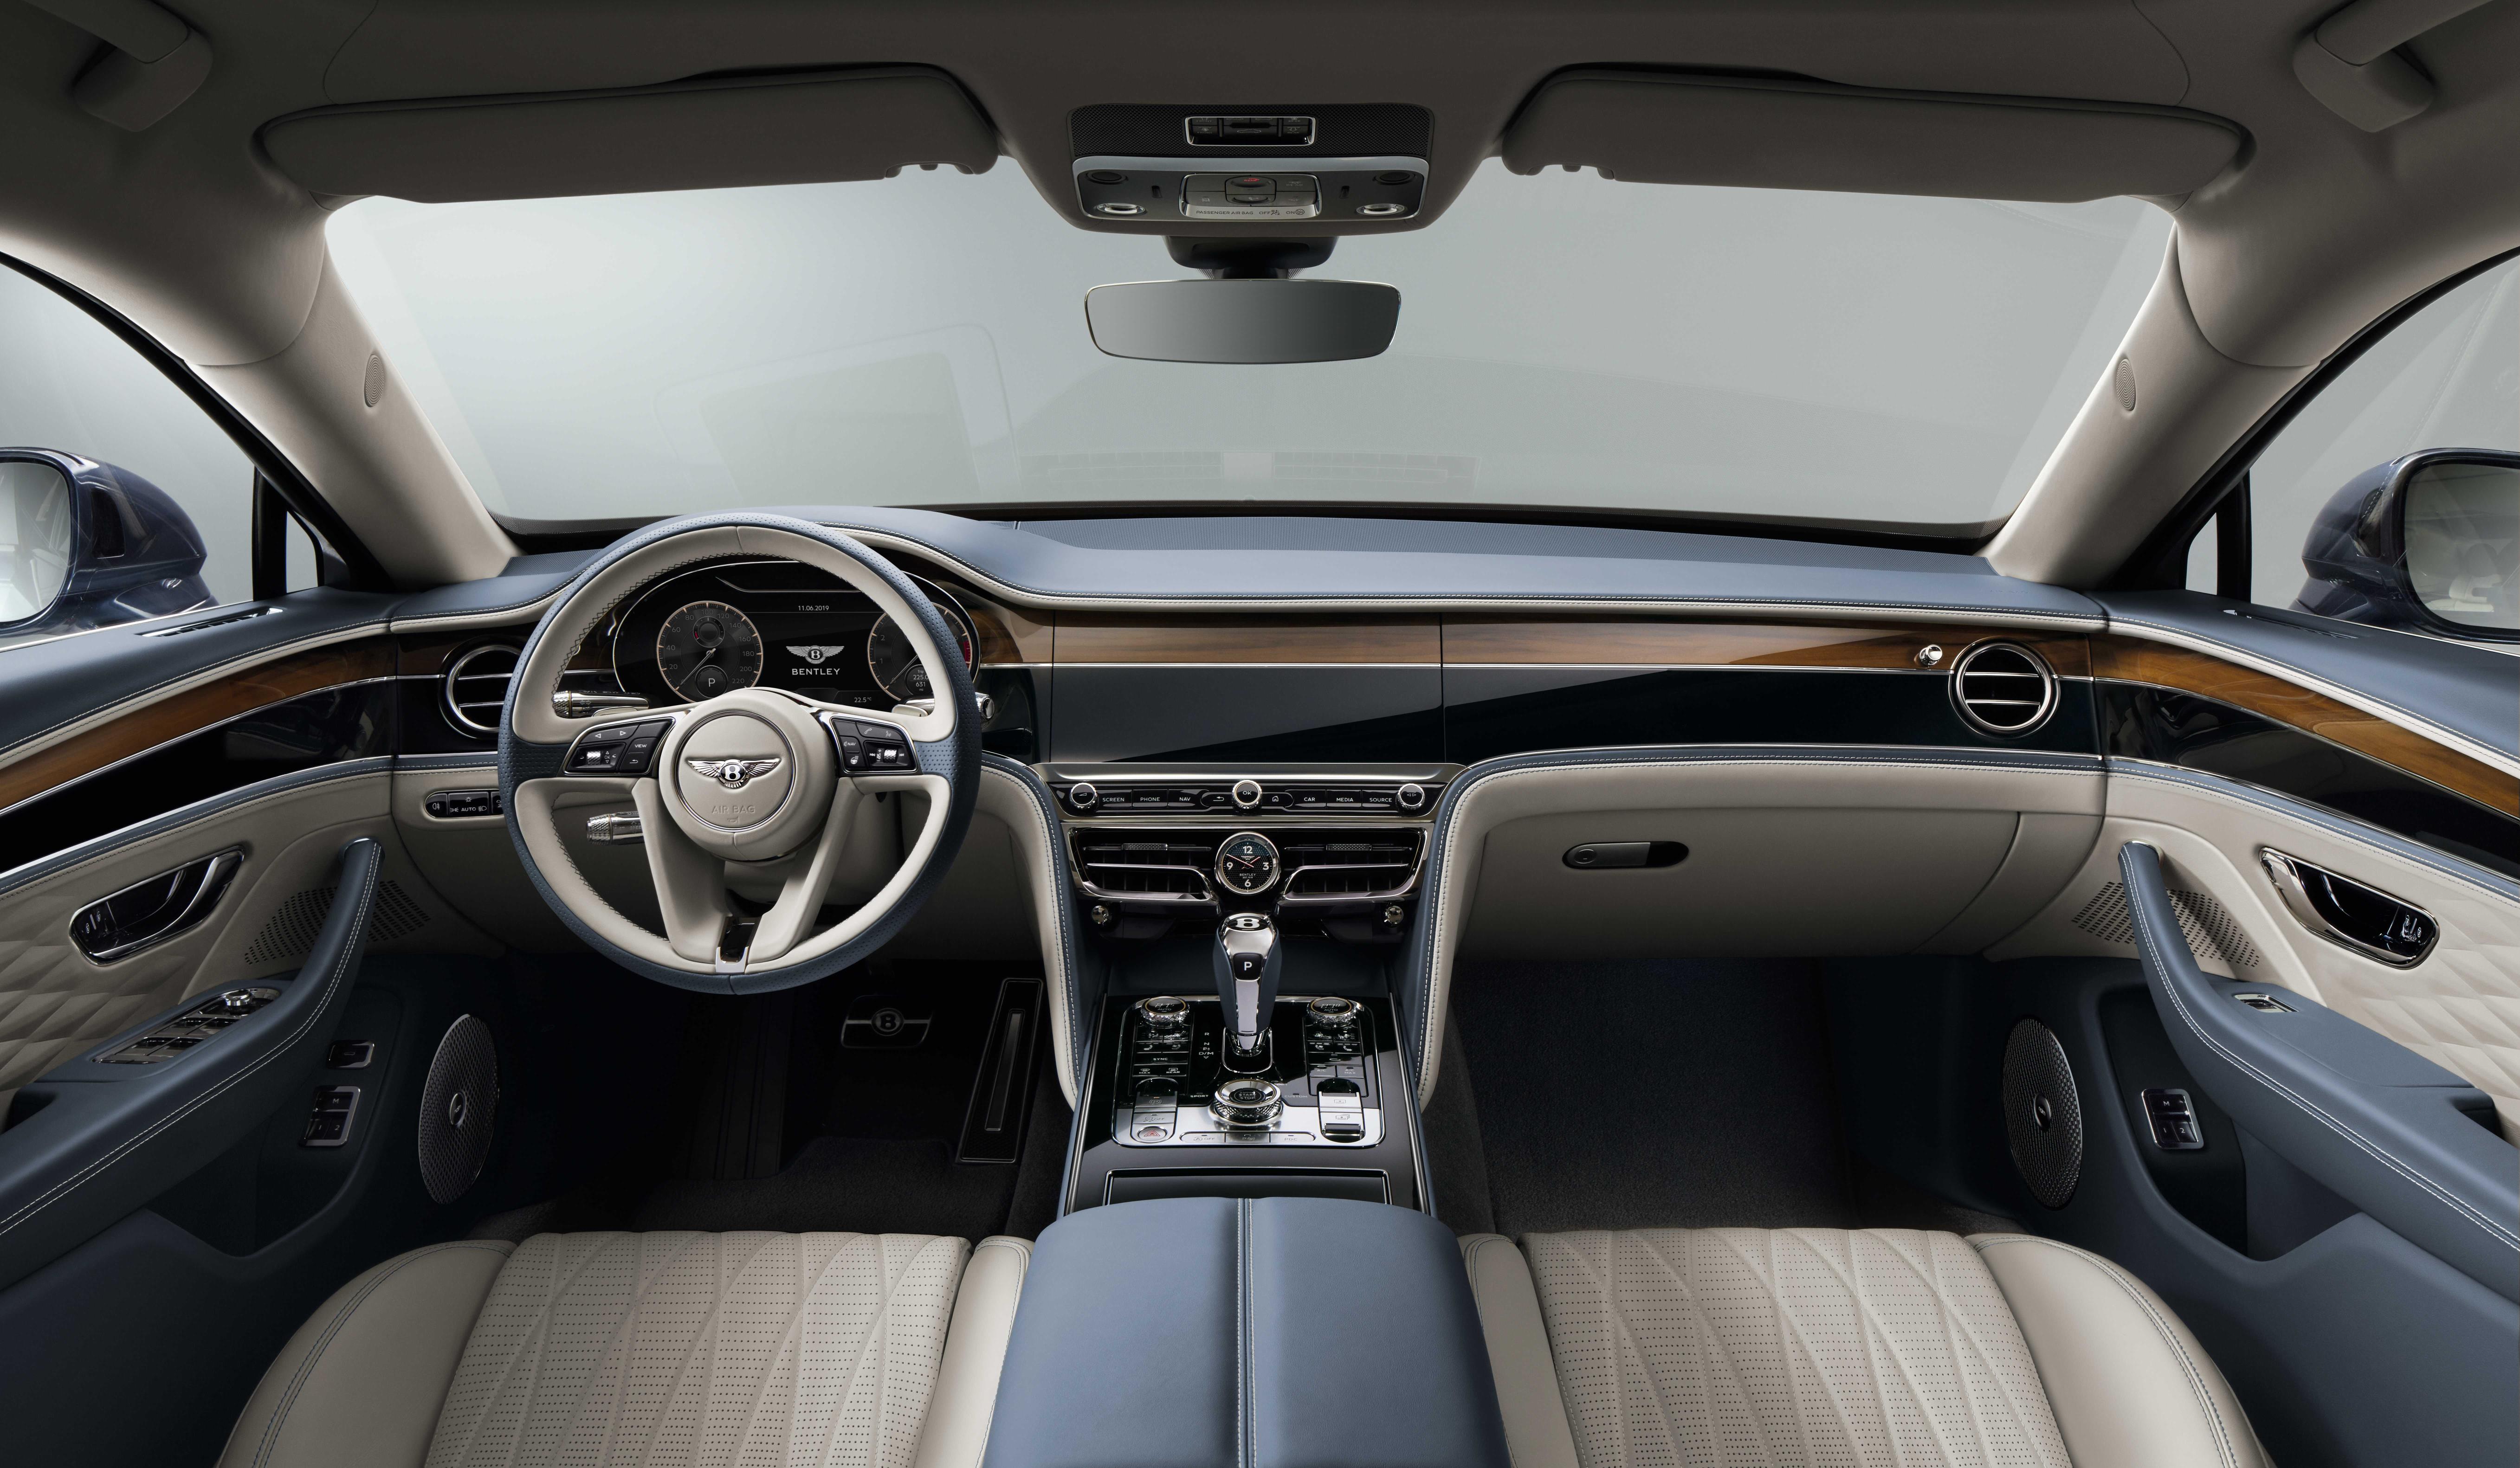 The Flying Spur's interior is available in a variety of different colours and finishes